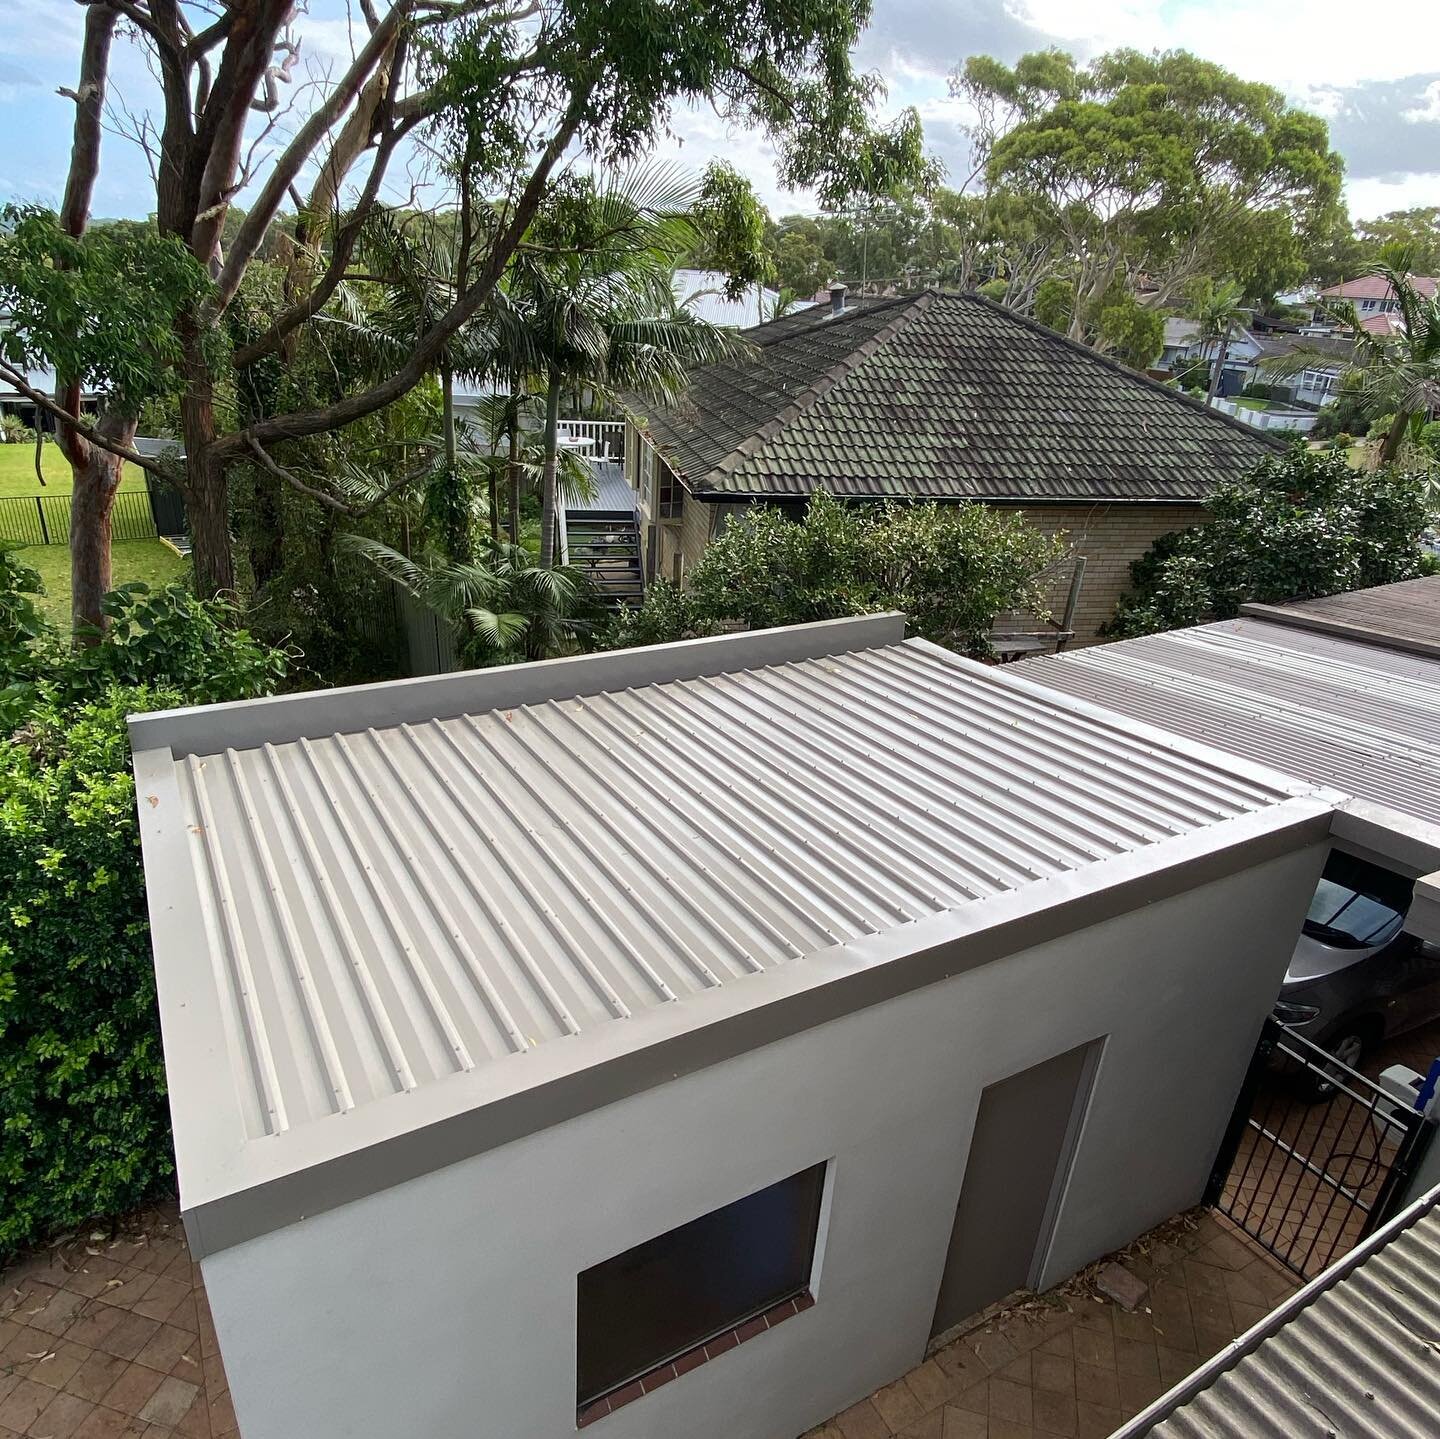 Woolooware re-roof a fresh new look! 
.
.
.
We recently completed this little re-roof for our awesome clients in woolooware.
The existing roof was under engineered which cause the roof to sag and constantly leek. 
&bull;
&bull;
&bull;
We installed 2 